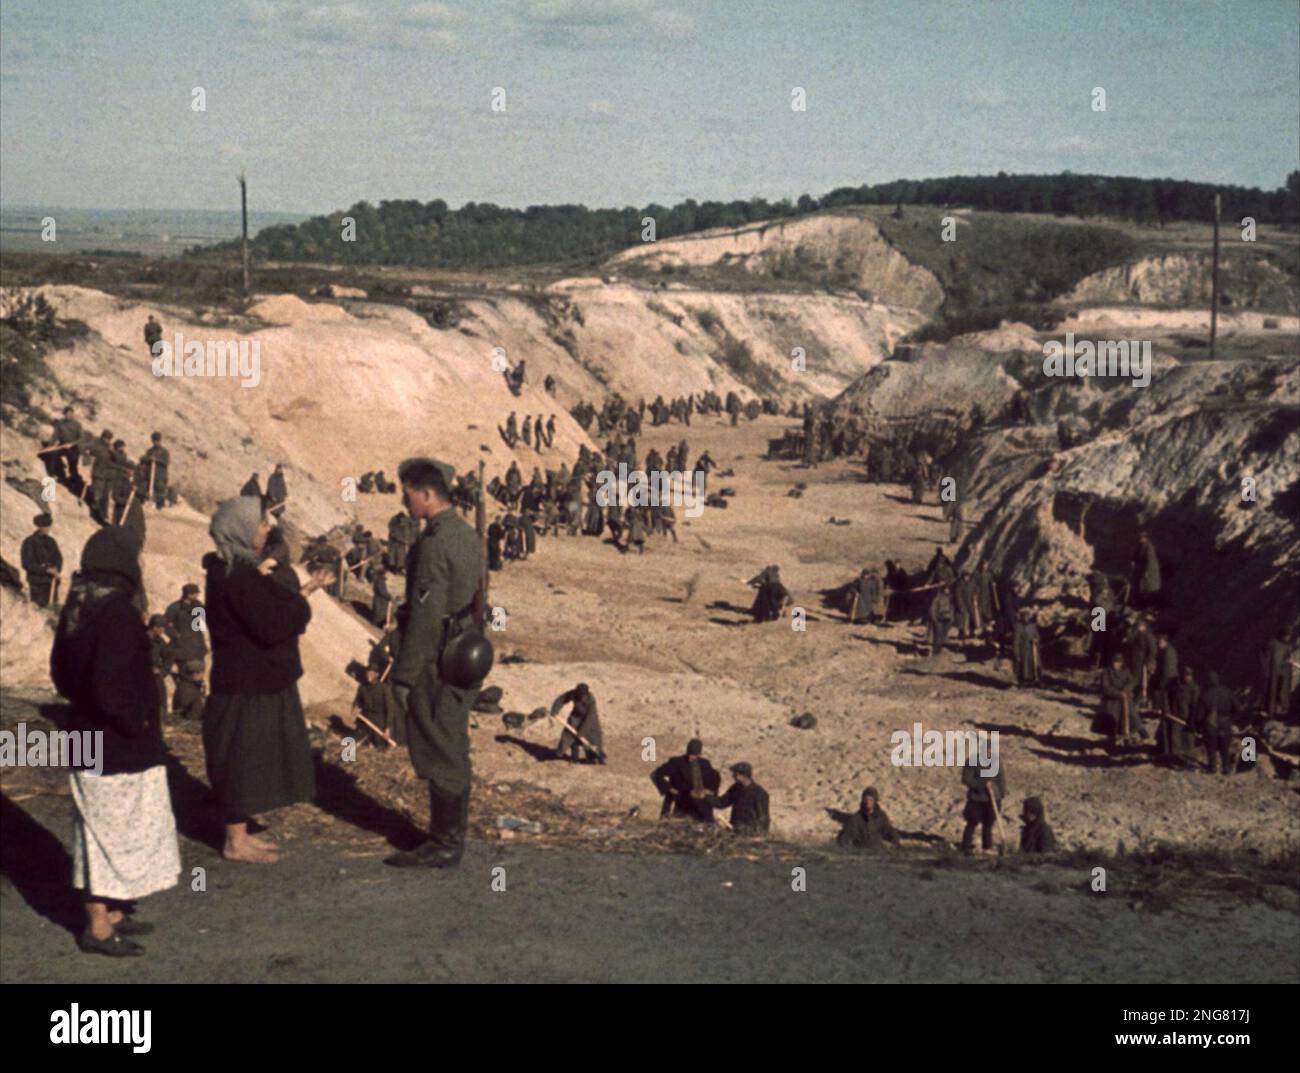 The early phase of the Holocaust was not with gas chambers but mobile execution squads known as Enisatzgruppen. Their task was to roam behind teh front lines shooting all the Jews they could.  This photo shows Soviet POWs covering a mass grave after the Babi Yar massacre, October 1, 1941. Stock Photo